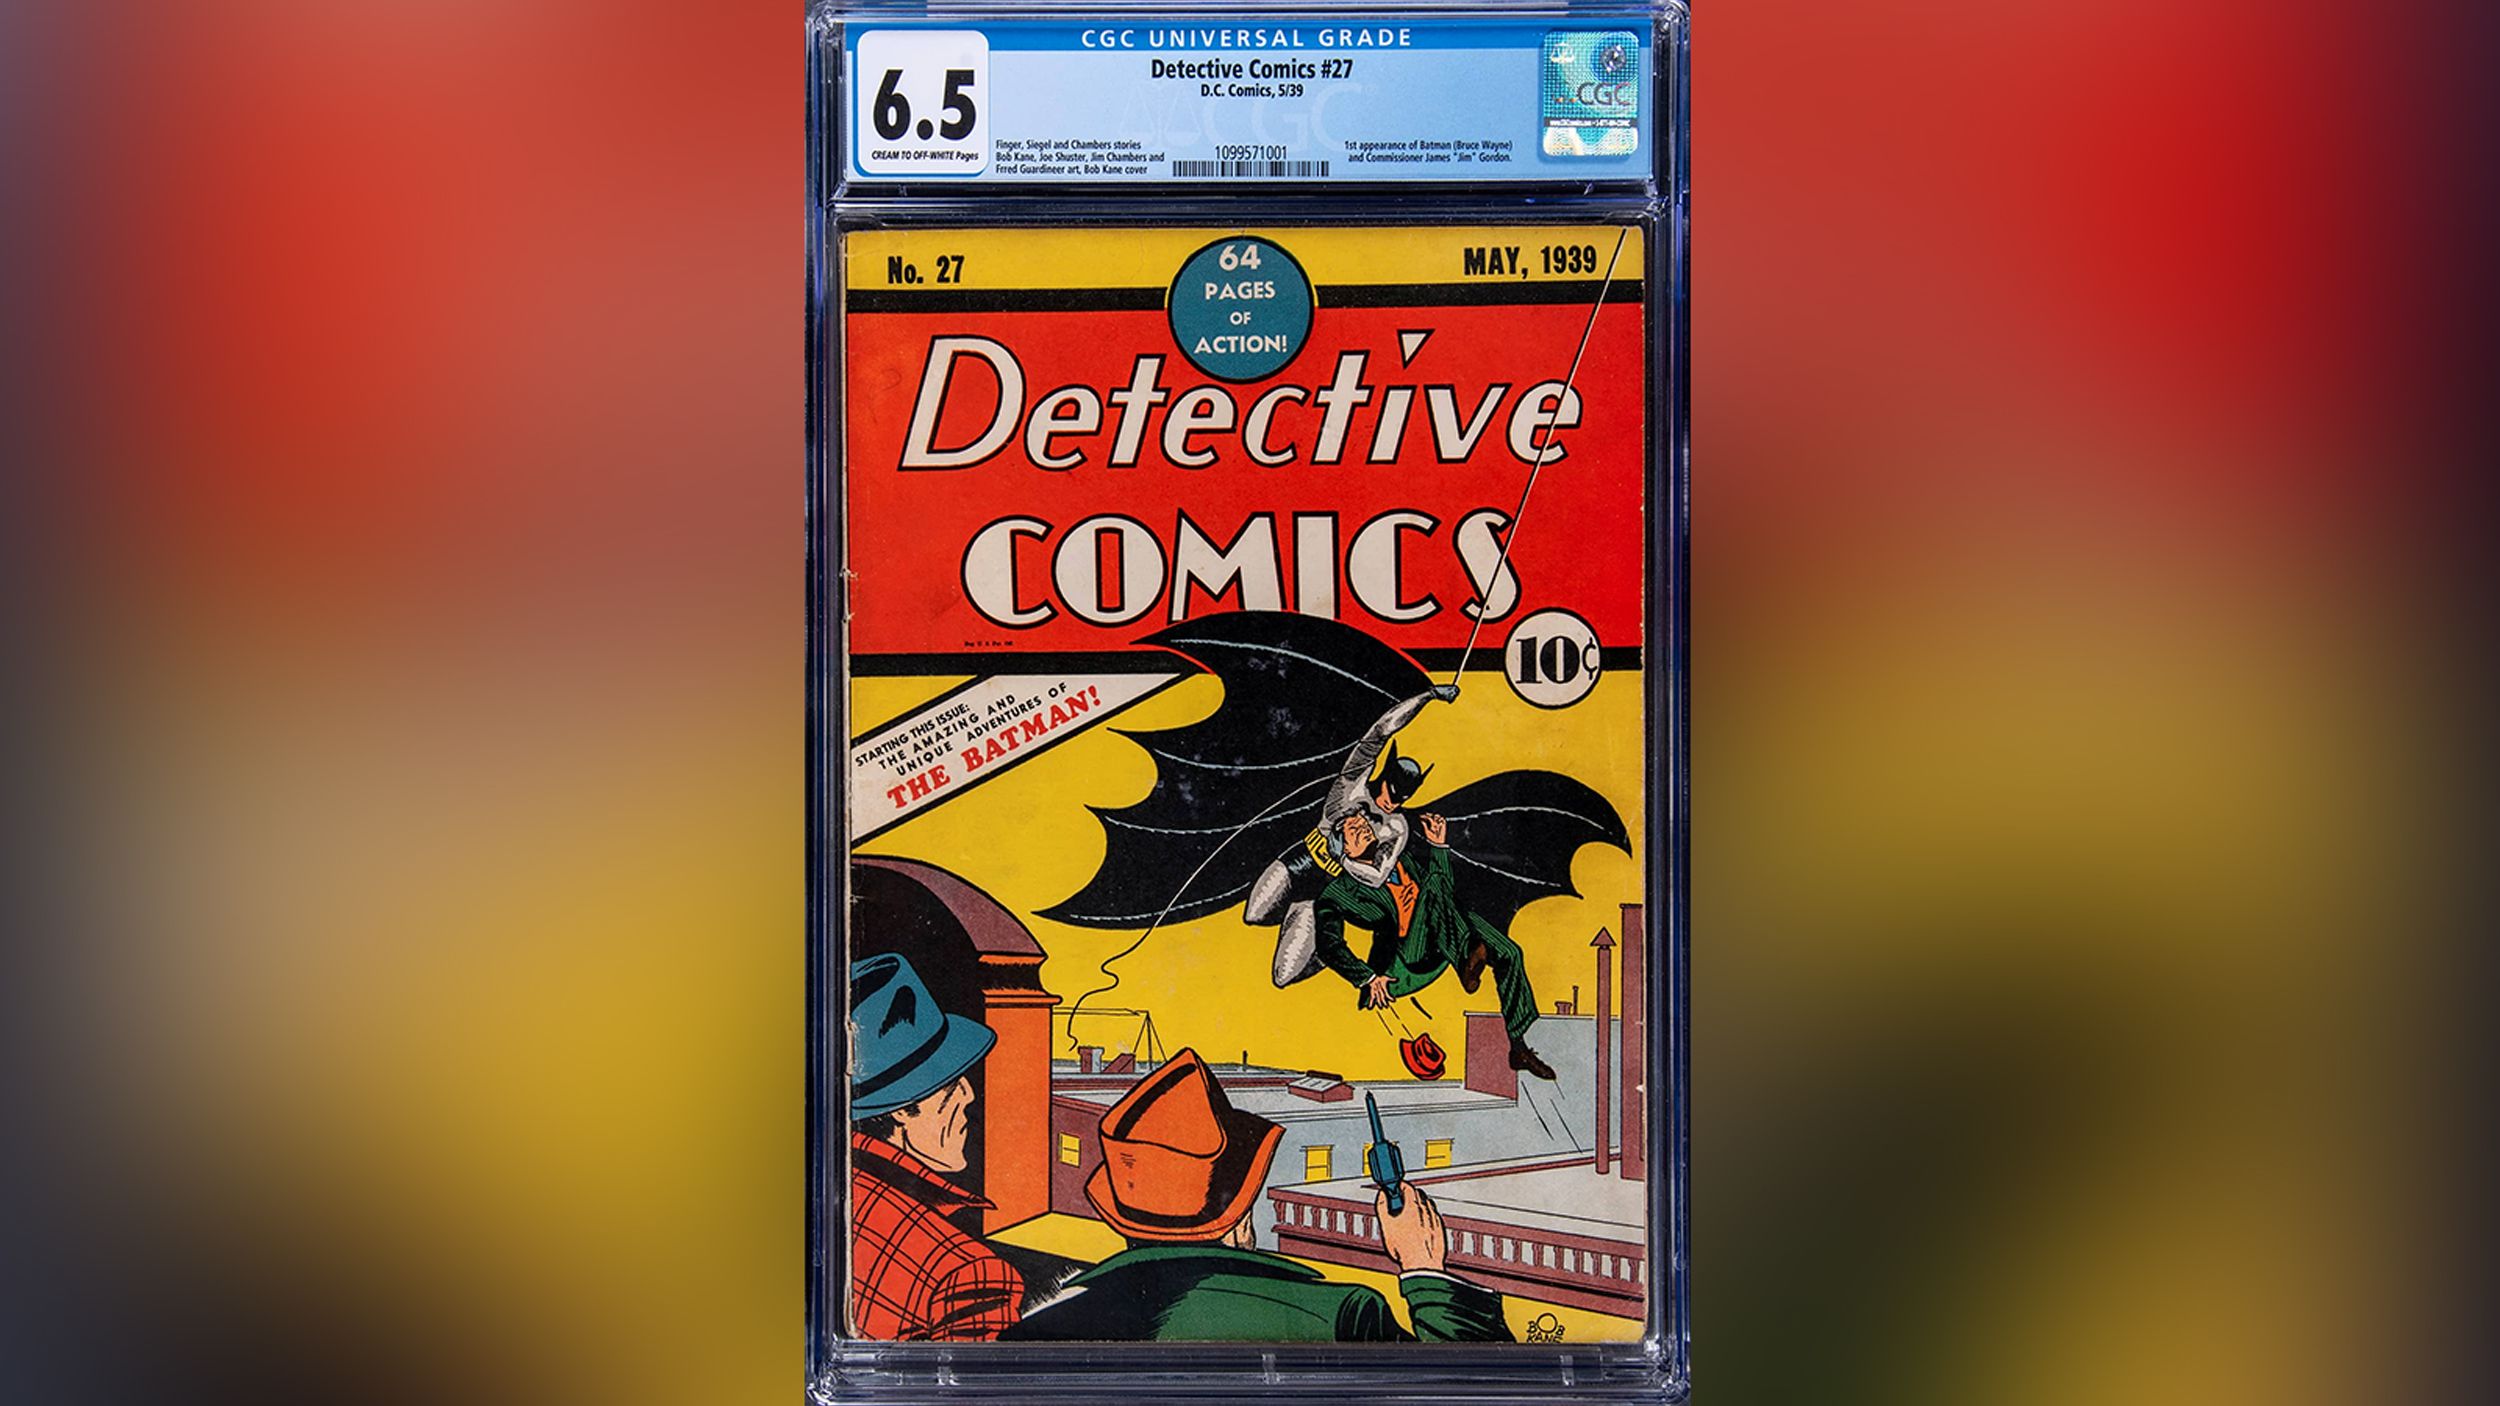 "This item is considered one of the holy grails of comic books," Goldin Auctions said.